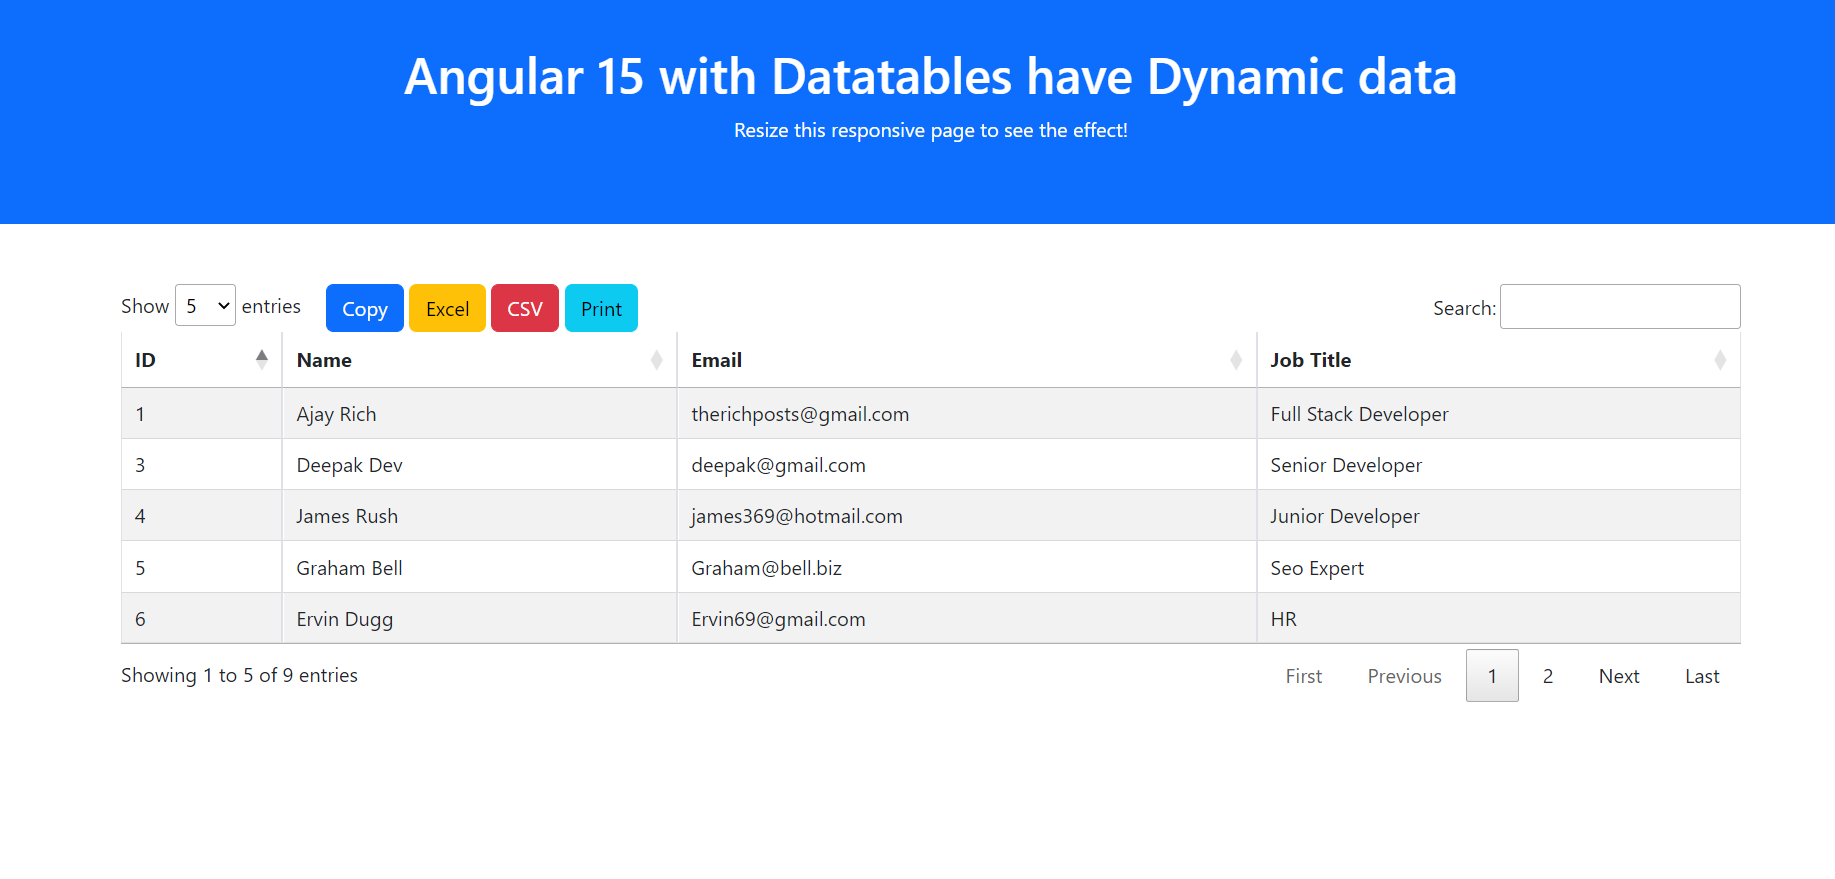 Angular 15 Datatable with Print CSV Excel Copy Buttons